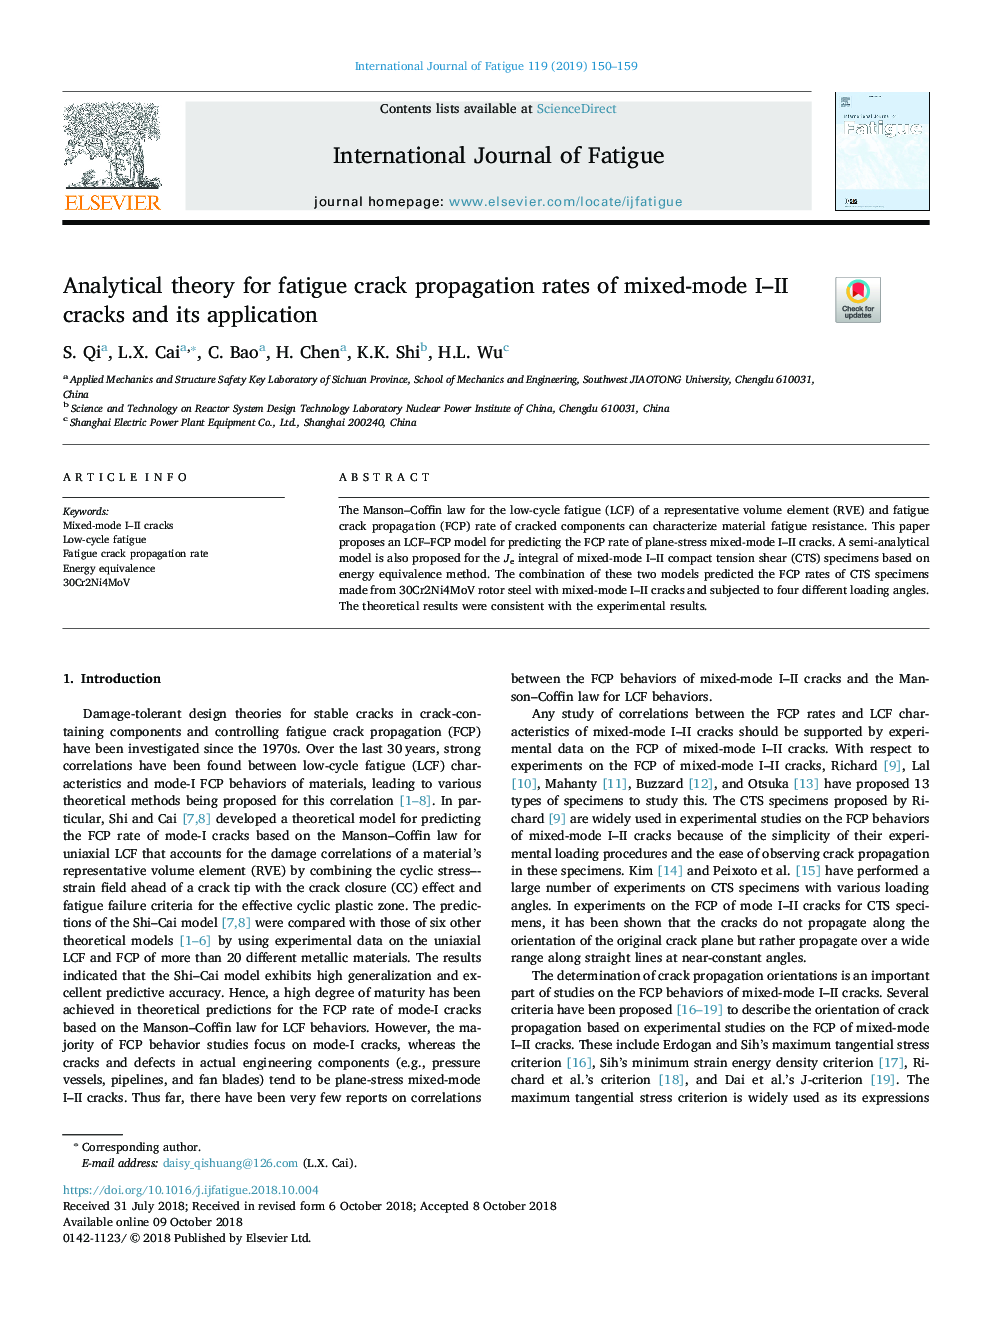 Analytical theory for fatigue crack propagation rates of mixed-mode I-II cracks and its application